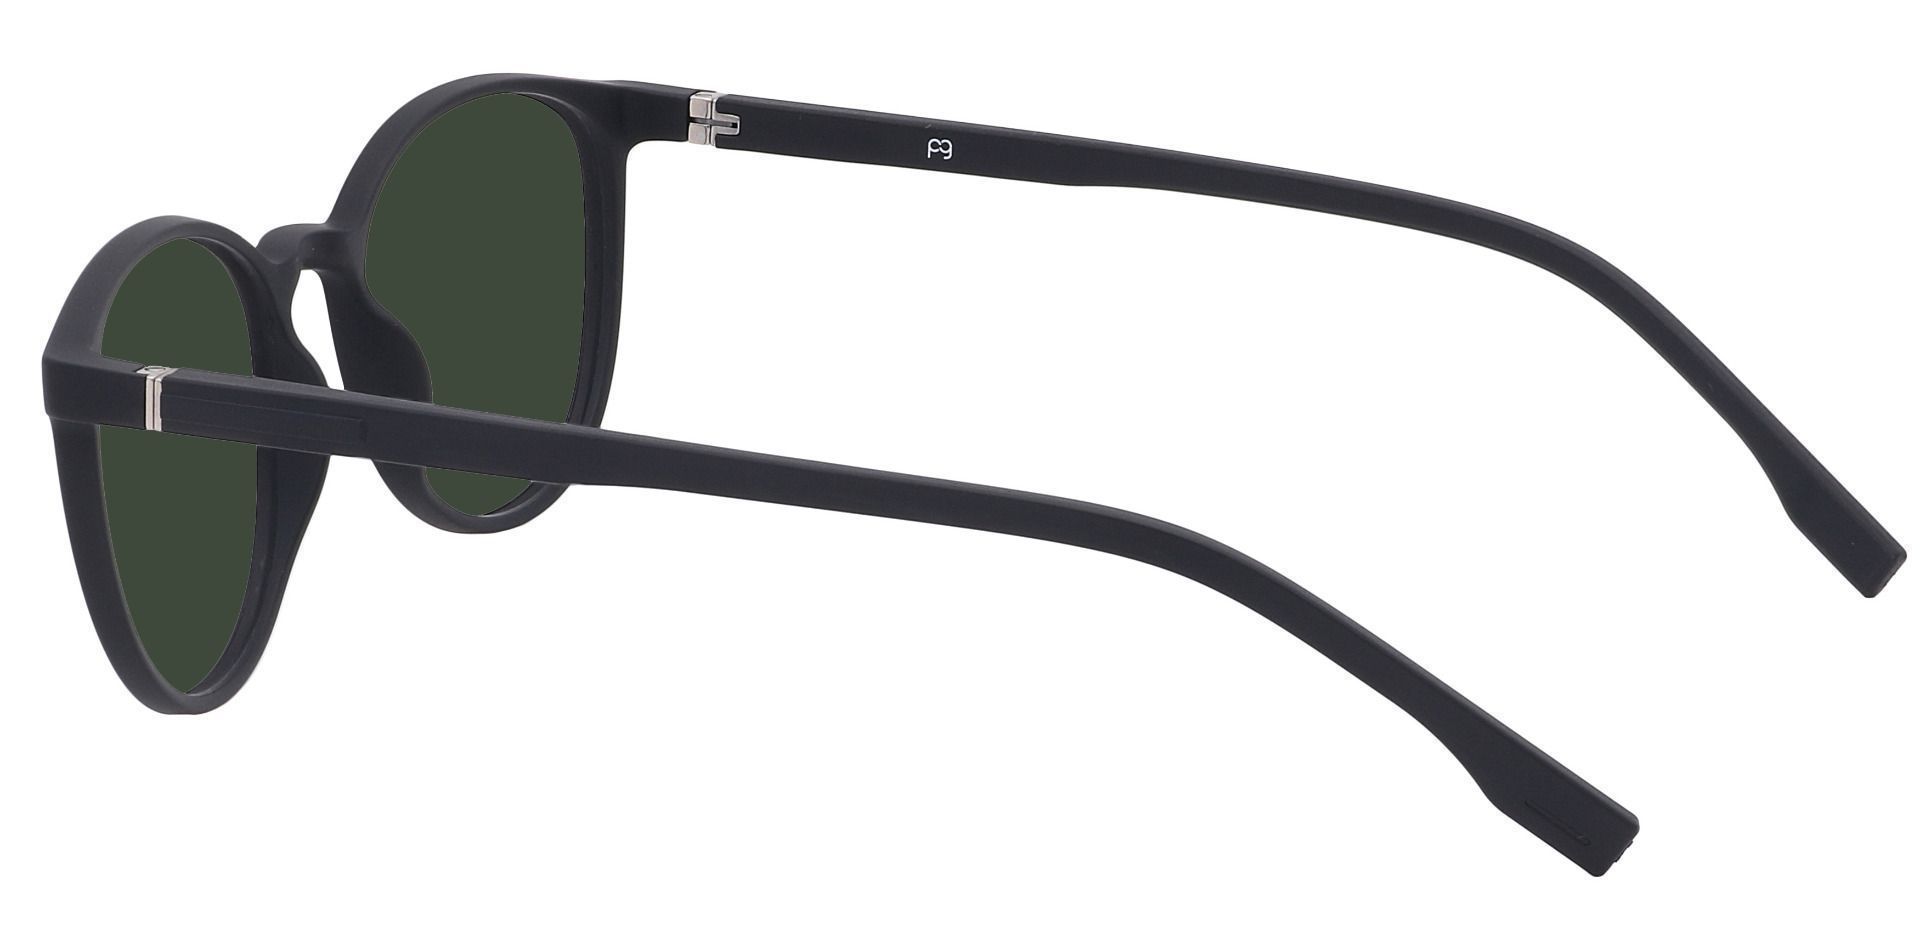 Bay Round Non-Rx Sunglasses - Black Frame With Green Lenses